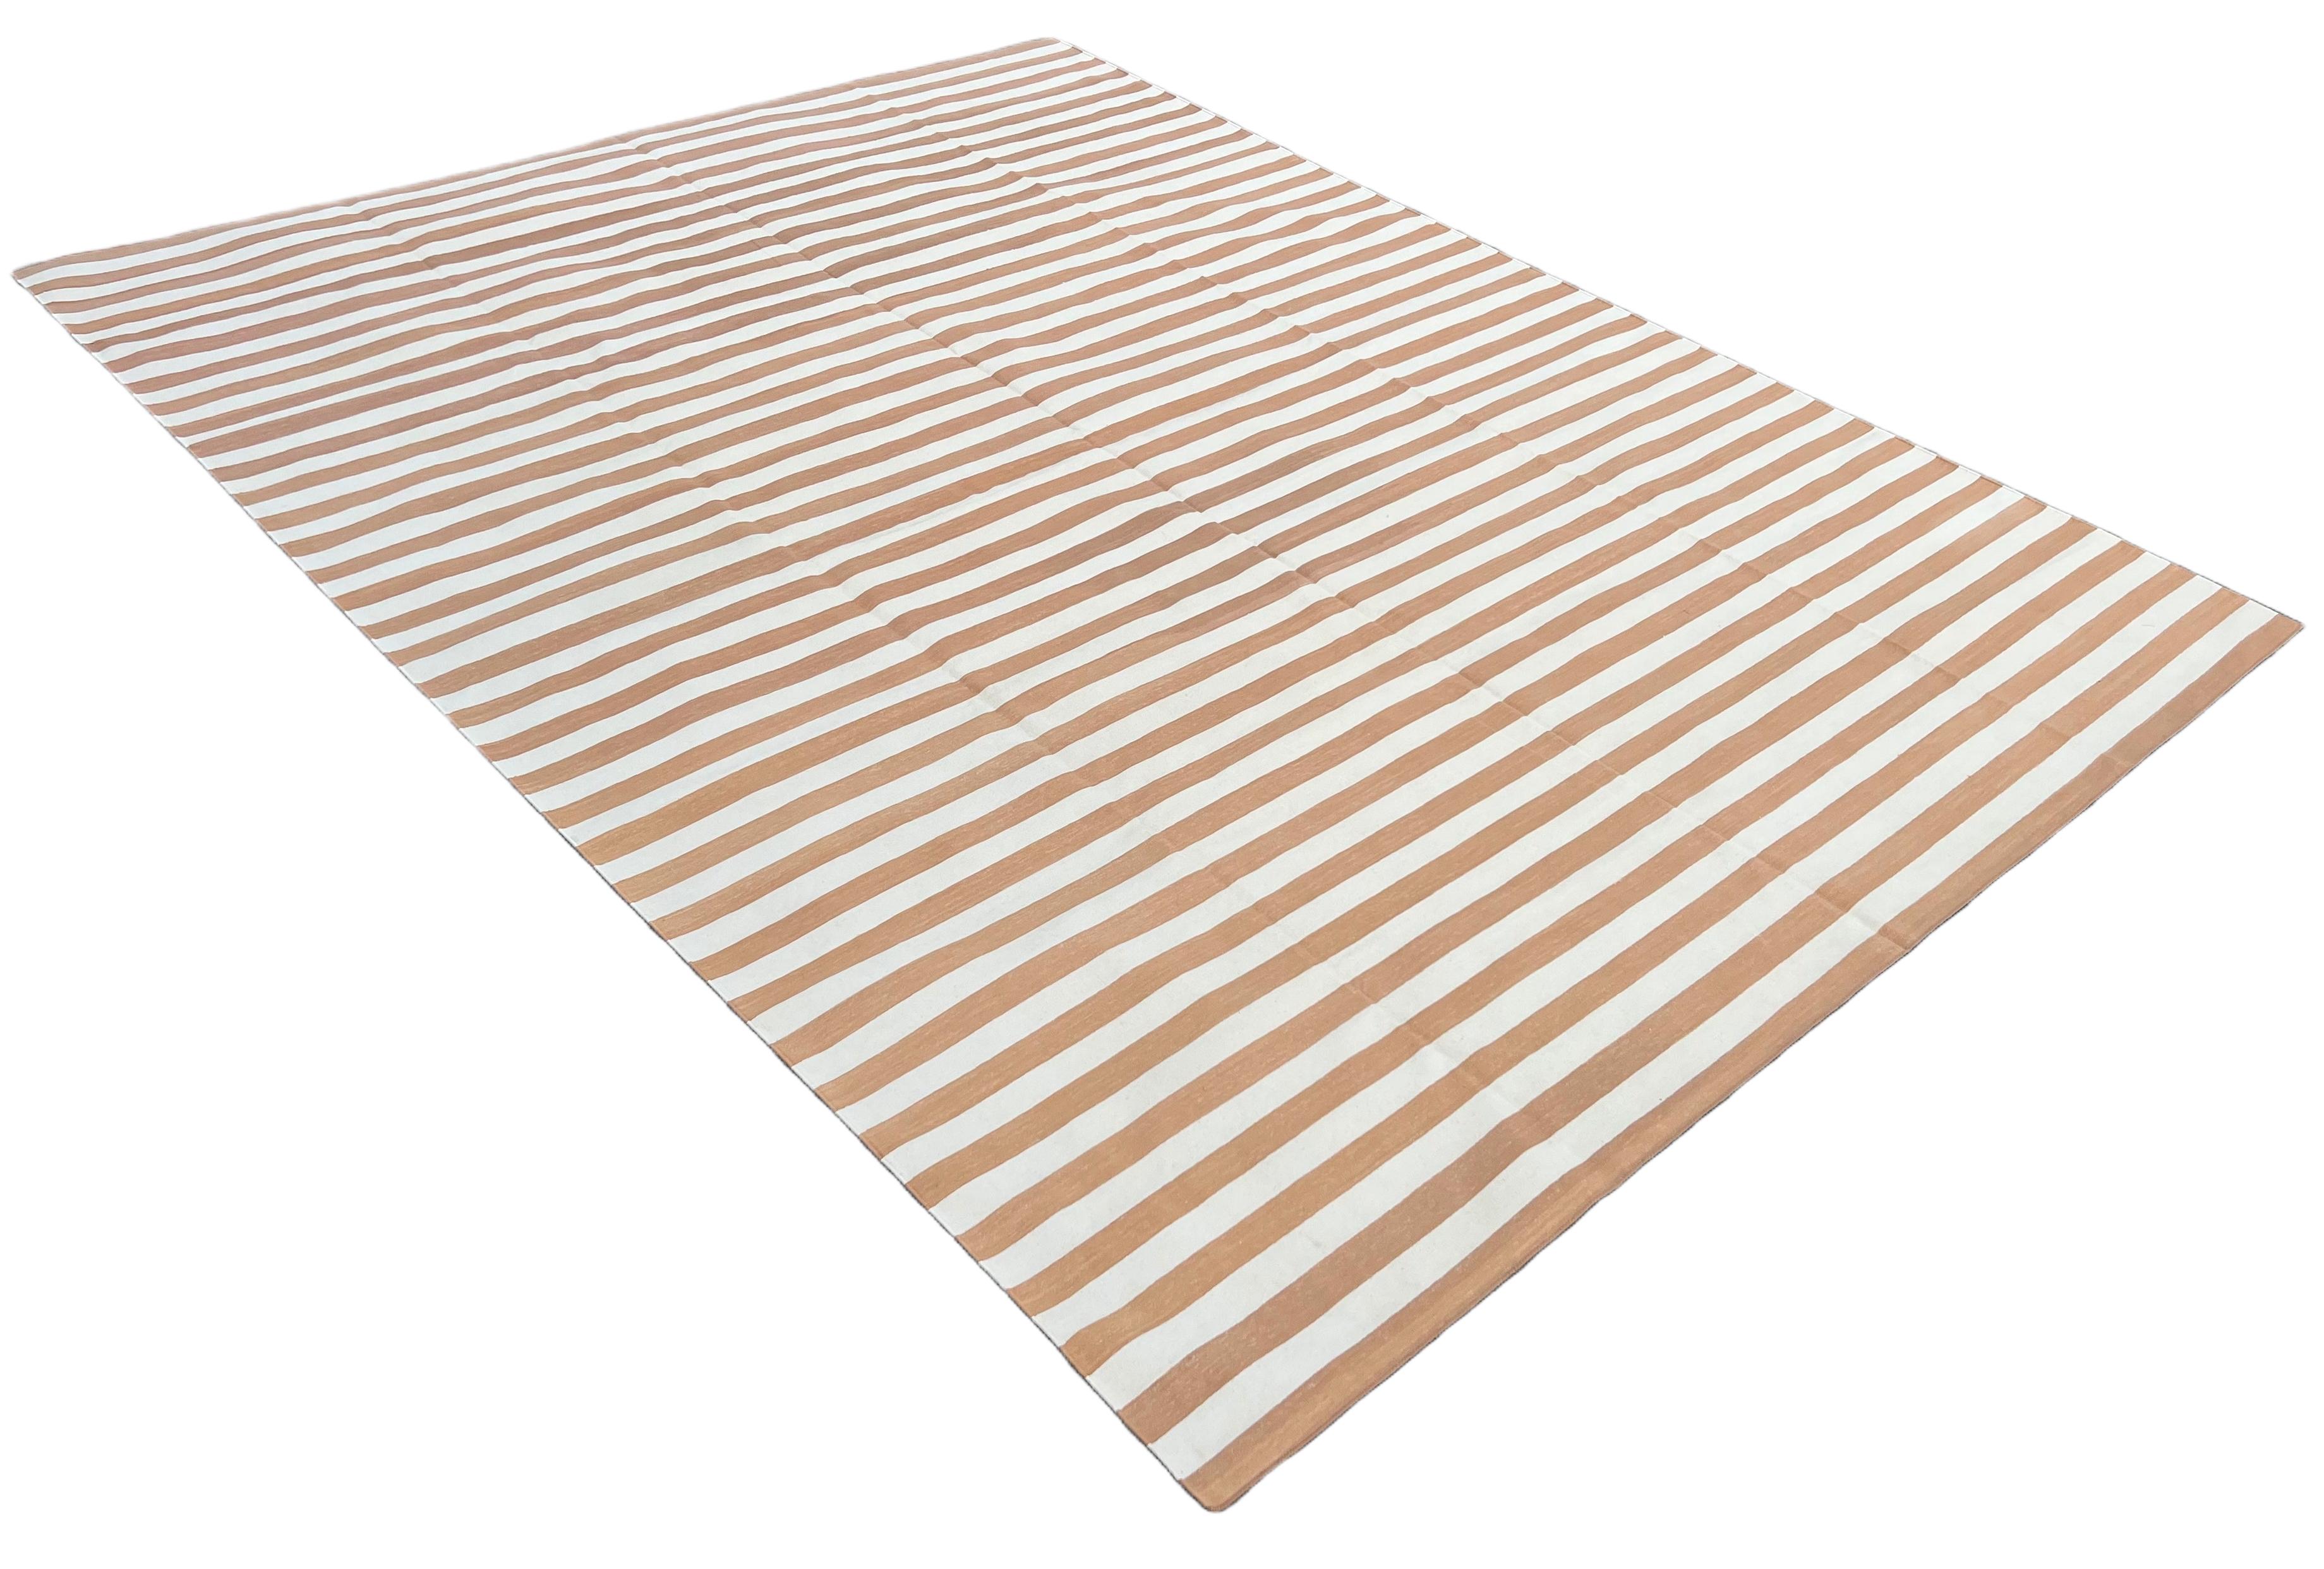 Cotton Vegetable Dyed Reversible Tan And White Striped Indian Dhurrie Rug - 9'x12'
These special flat-weave dhurries are hand-woven with 15 ply 100% cotton yarn. Due to the special manufacturing techniques used to create our rugs, the size and color